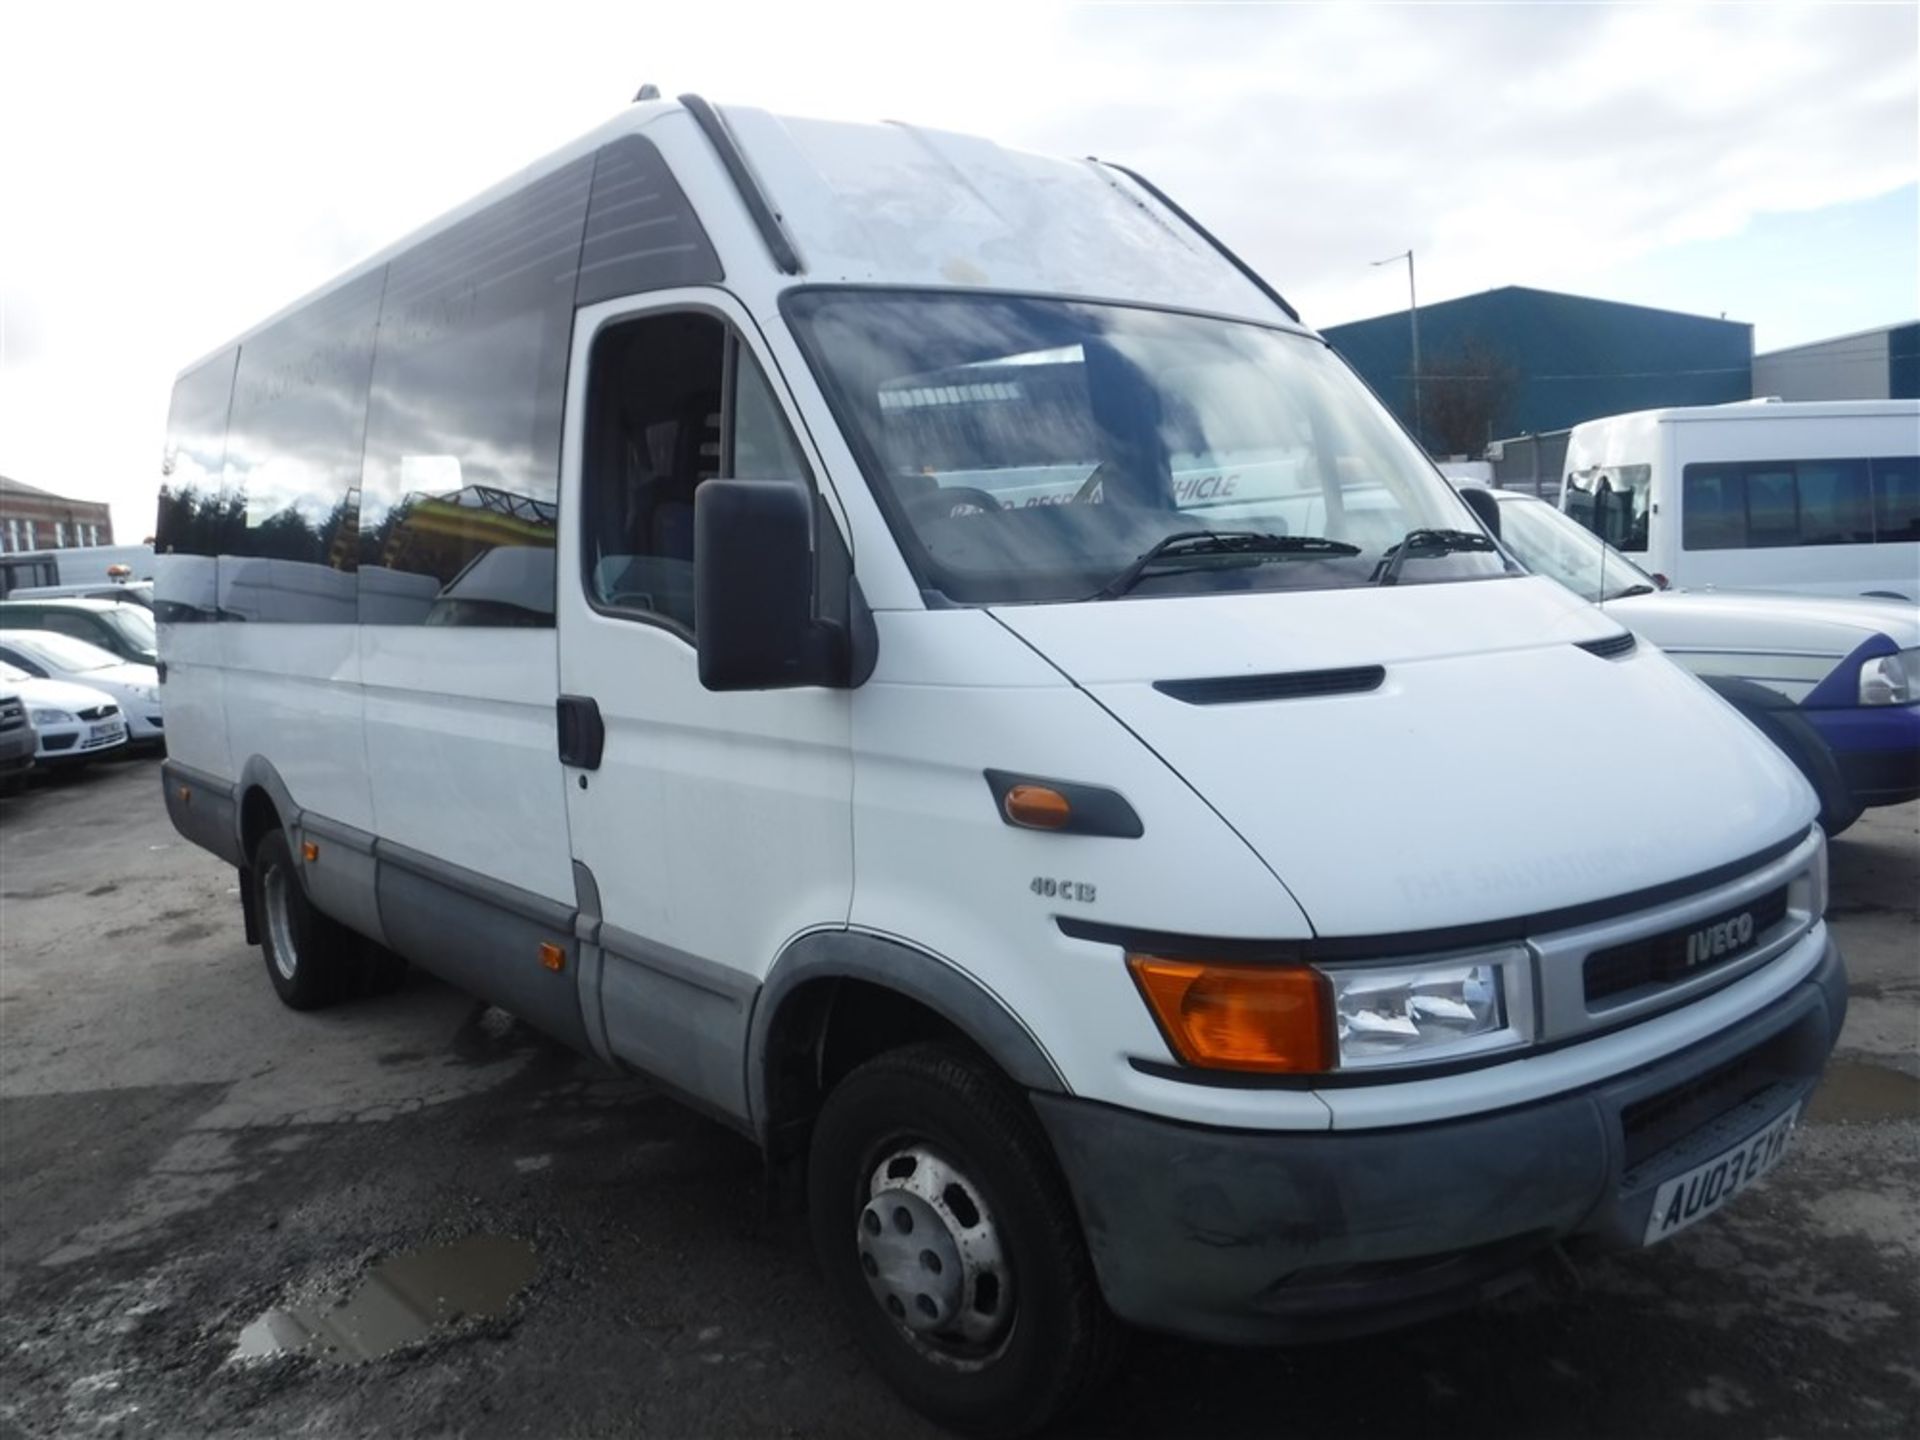 03 reg IVECO DAILY 40C13 IRIS BUS, 1ST REG 03/03, TEST 03/19, 105672KM WARRANTED, V5 HERE, 1 OWNER